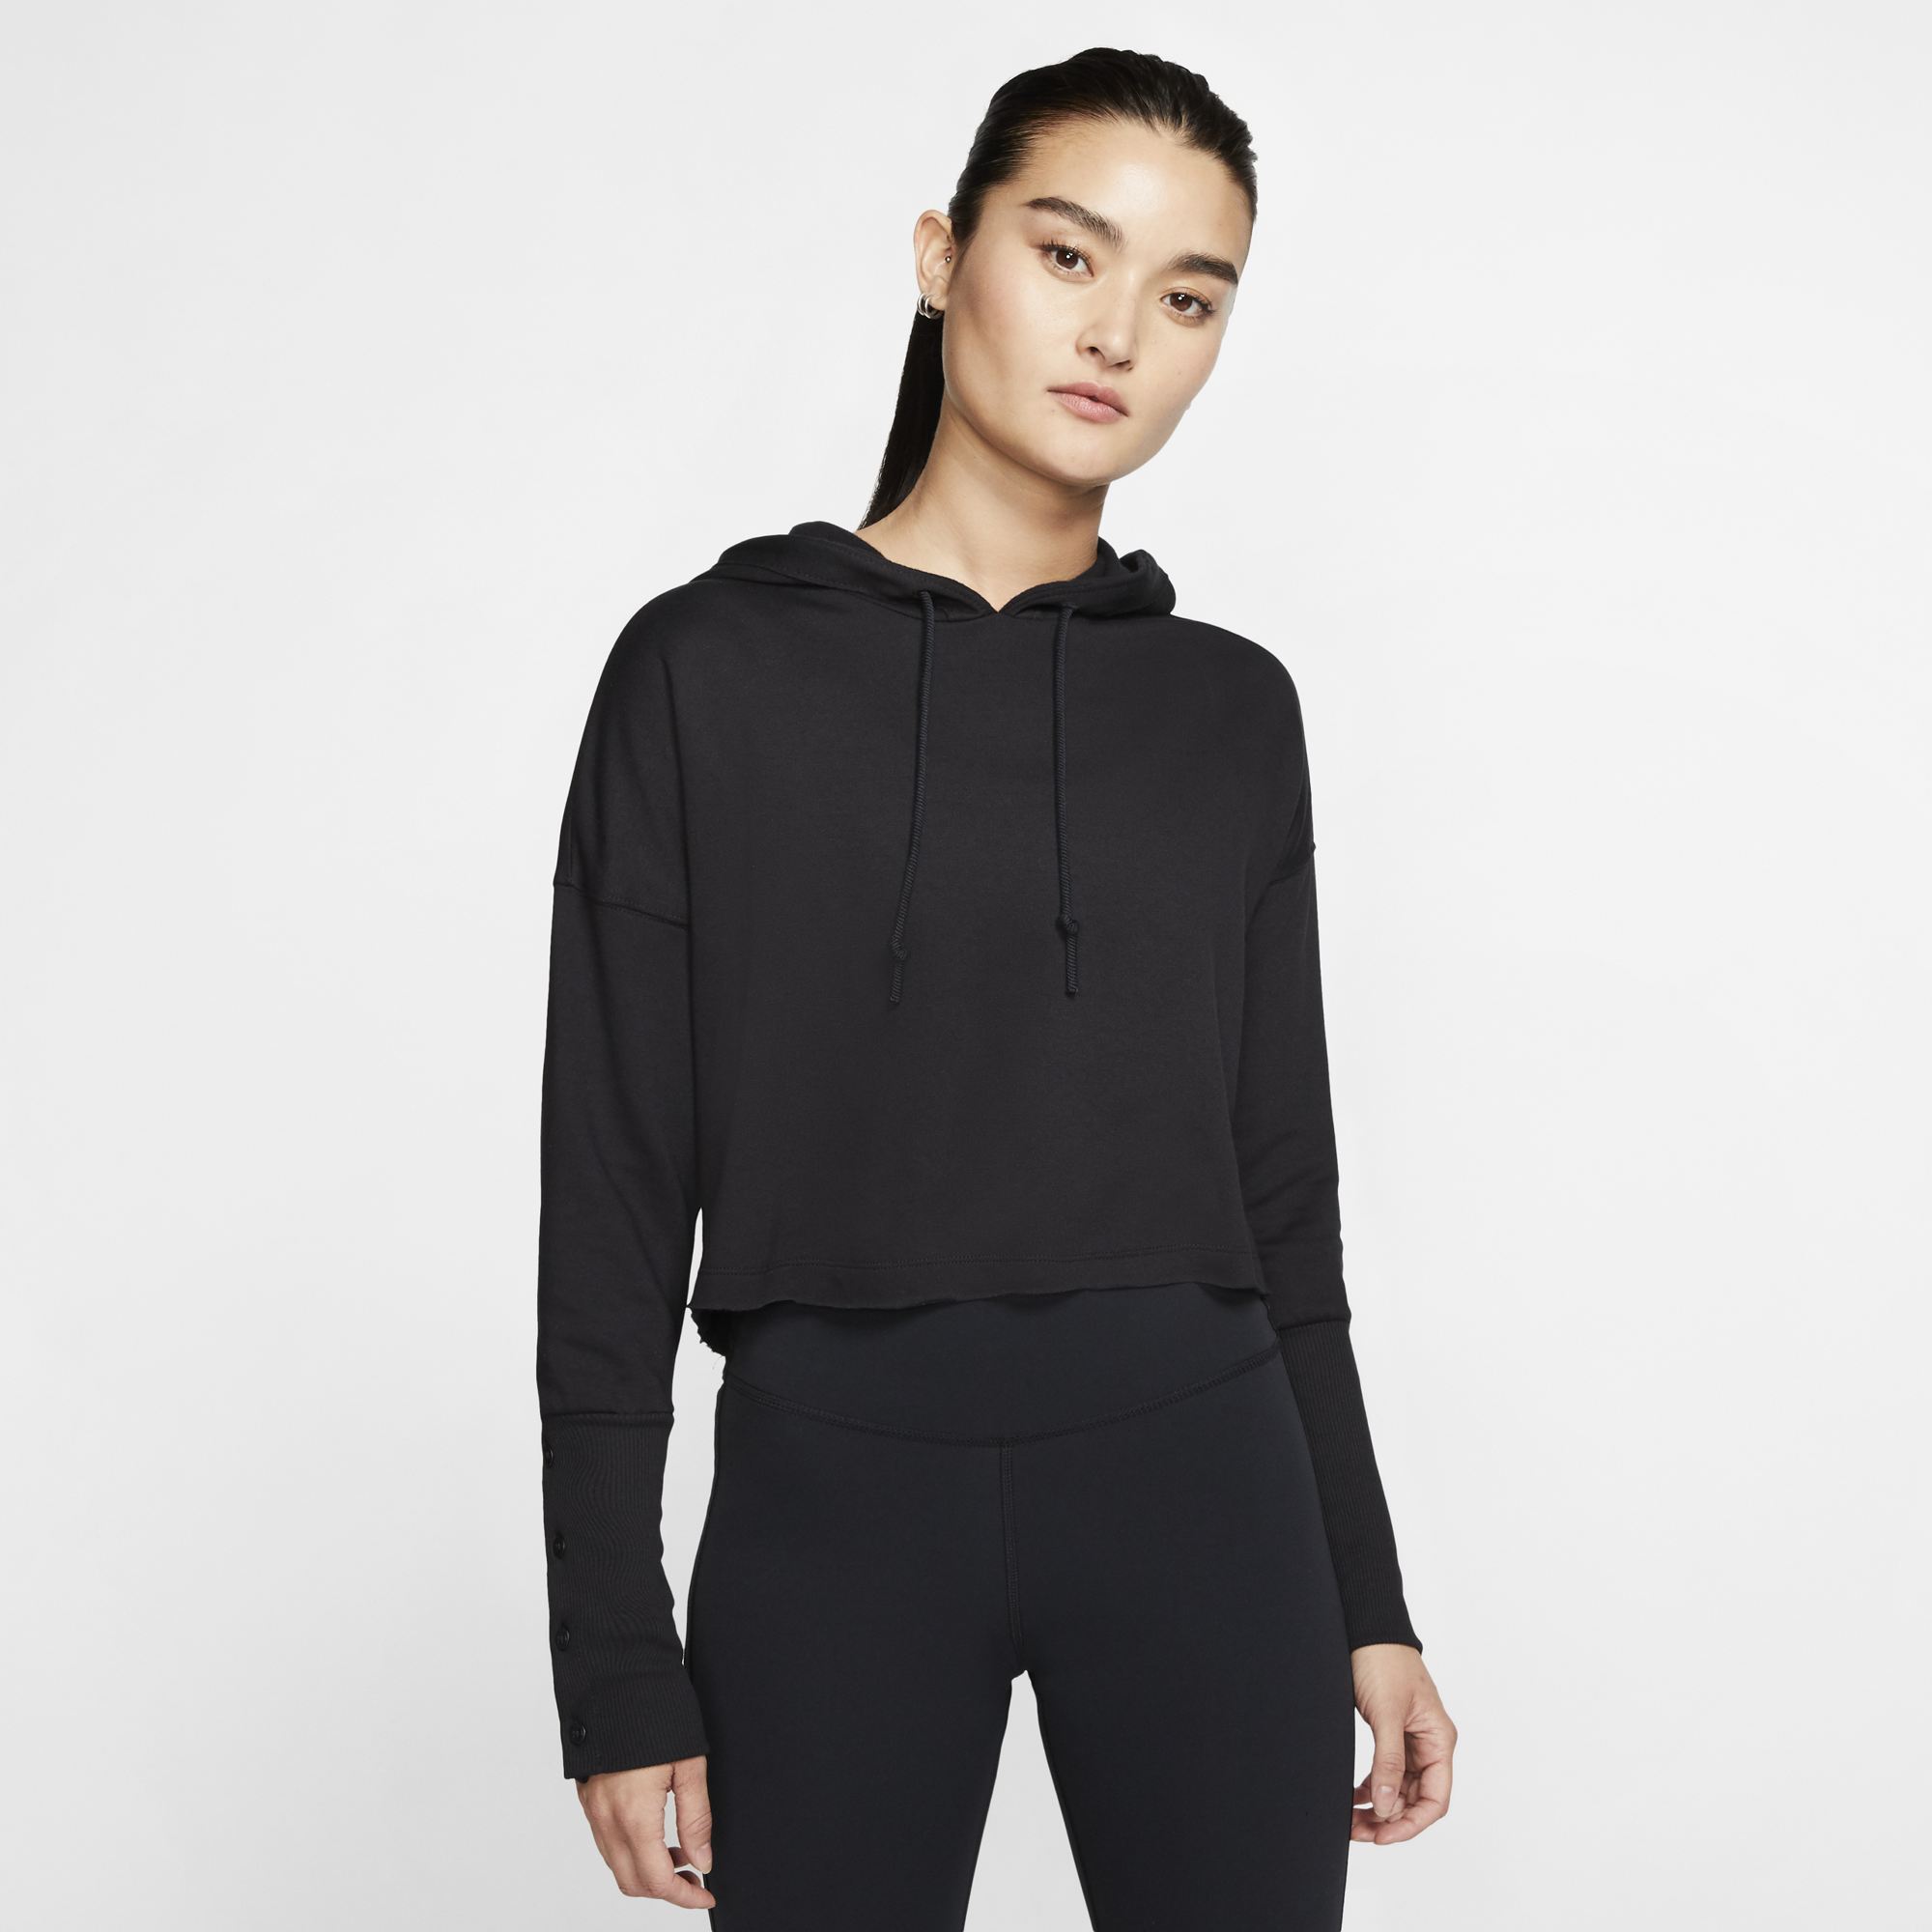 Nike's first yoga apparel collection is nothing to scoff at, the